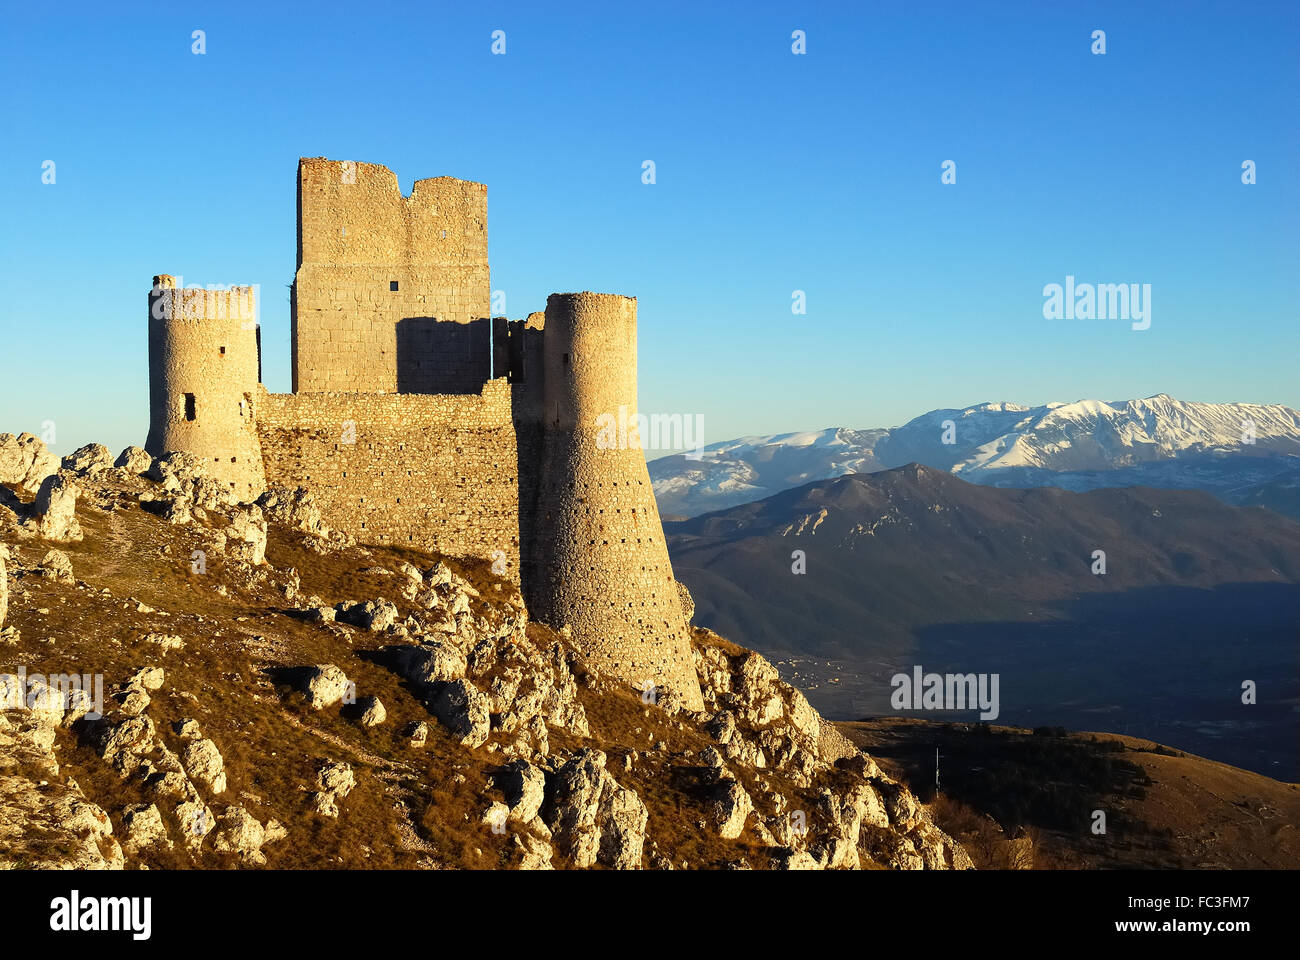 Rocca Calascio is a mountaintop fortress or rocca in the Province of L'Aquila in Abruzzo, Italy. At an elevation of 1,460 metres (4,790 ft), Rocca Calascio is the highest fortress in the Apennines.  Rocca Calascio was the location for the final scene of Richard Donner film Ladyhawke.  Sequences for The Name of the Rose and The American were also shot here. Stock Photo